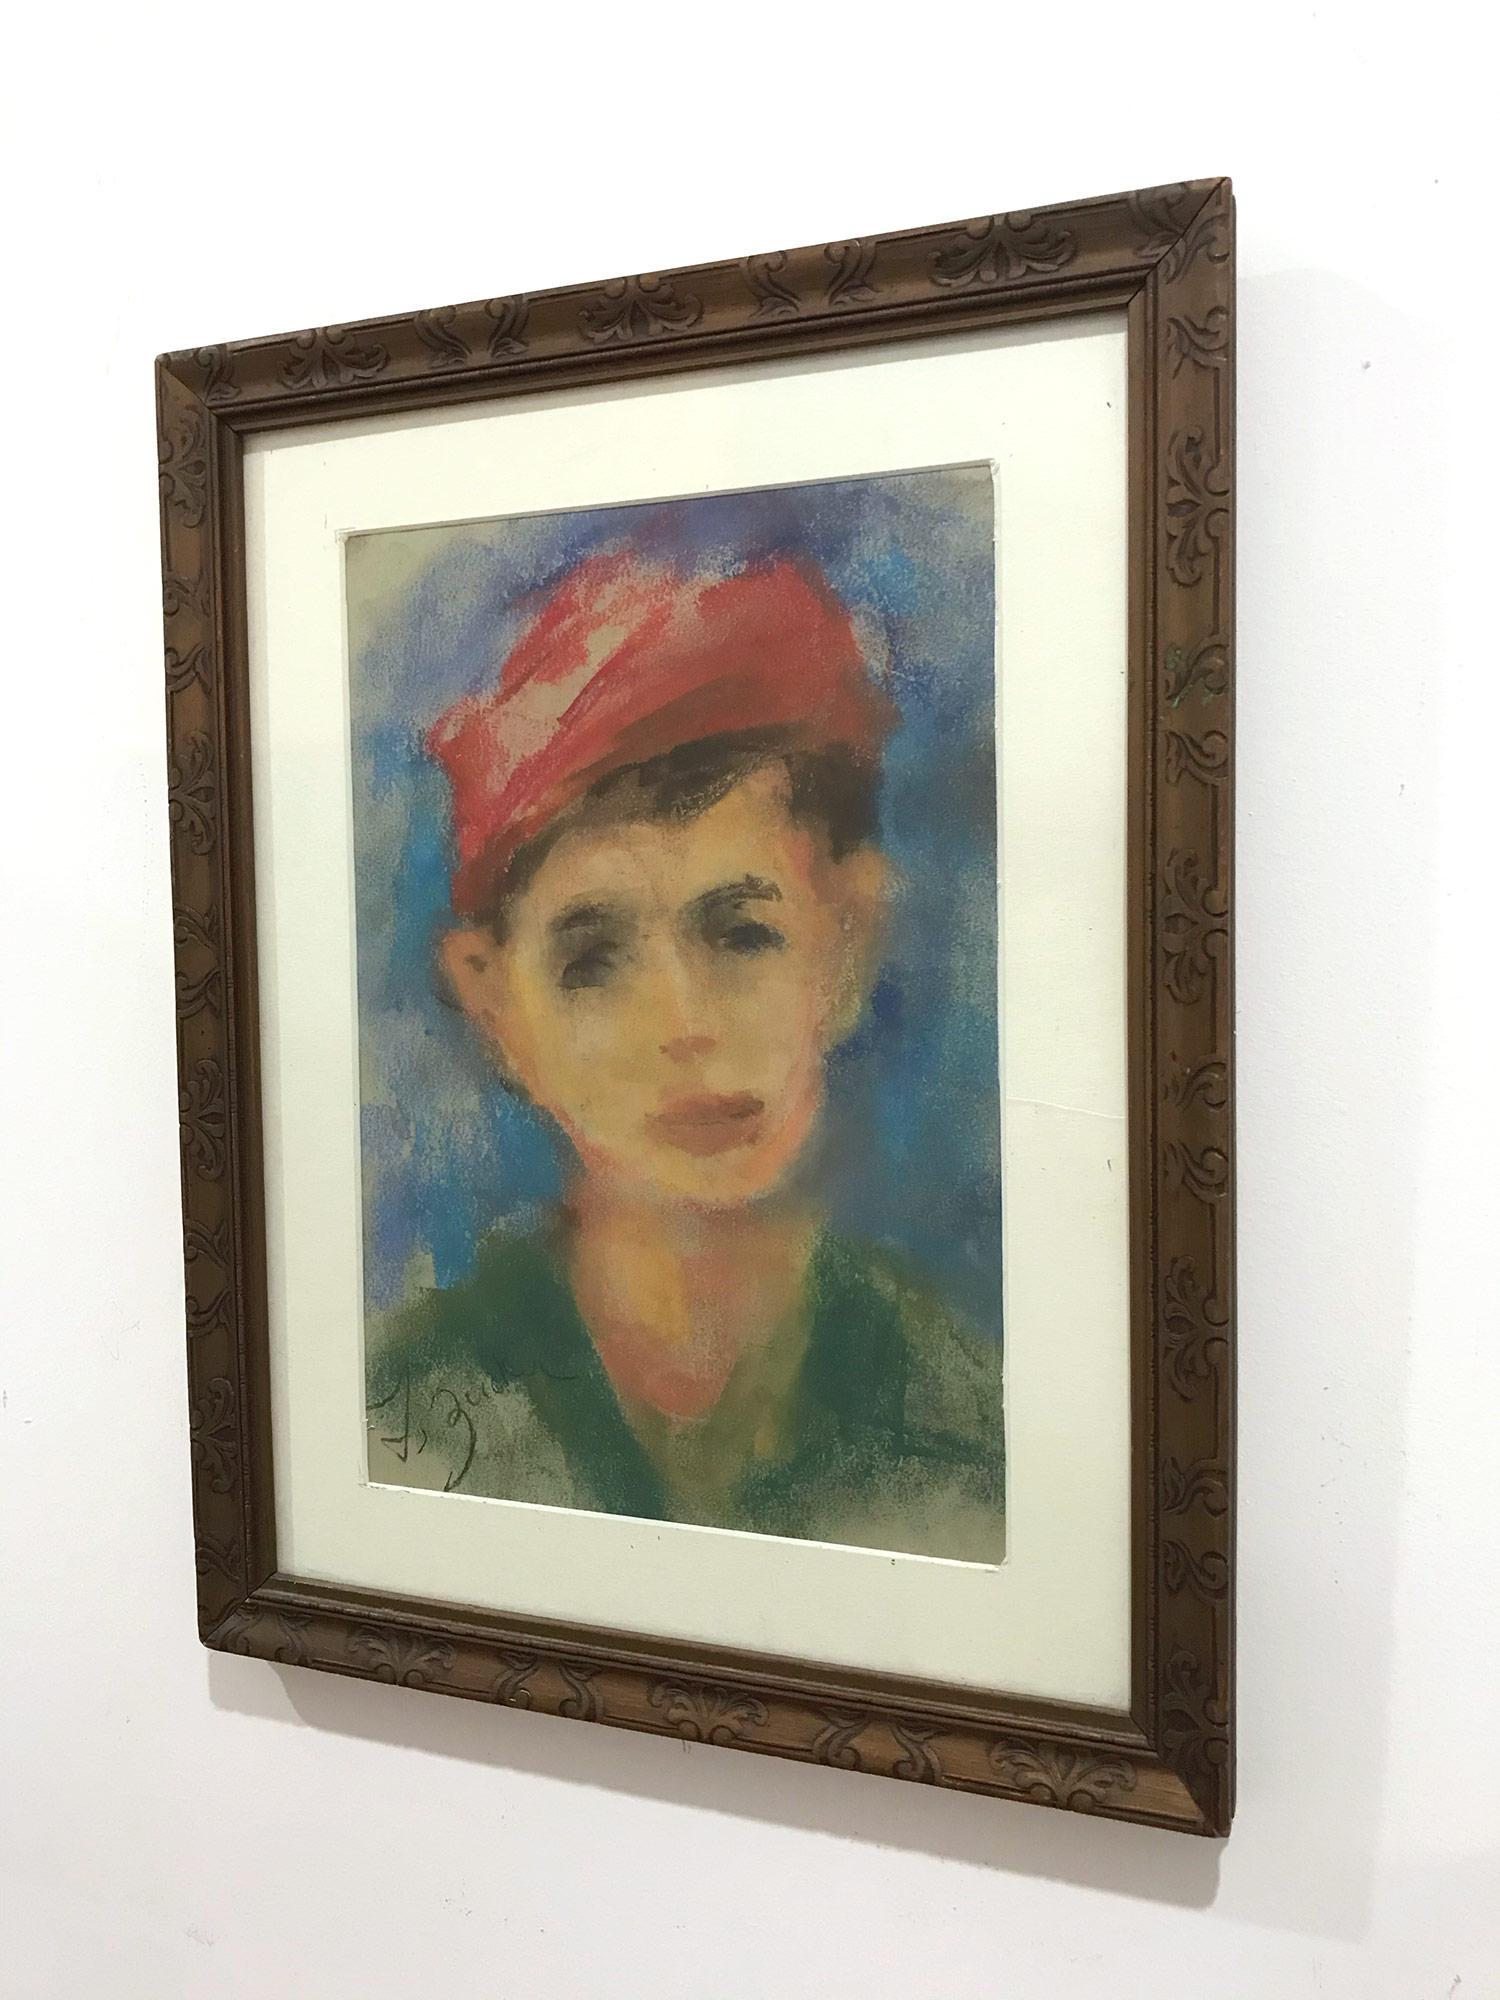 This painting depicts a whimsical portrait of a Young Boy with a Red Cap with great attention to detail, an emotion is felt in the boy's face. The blue, green, and red colors are used and quick strokes are what makes this painting so attractive and